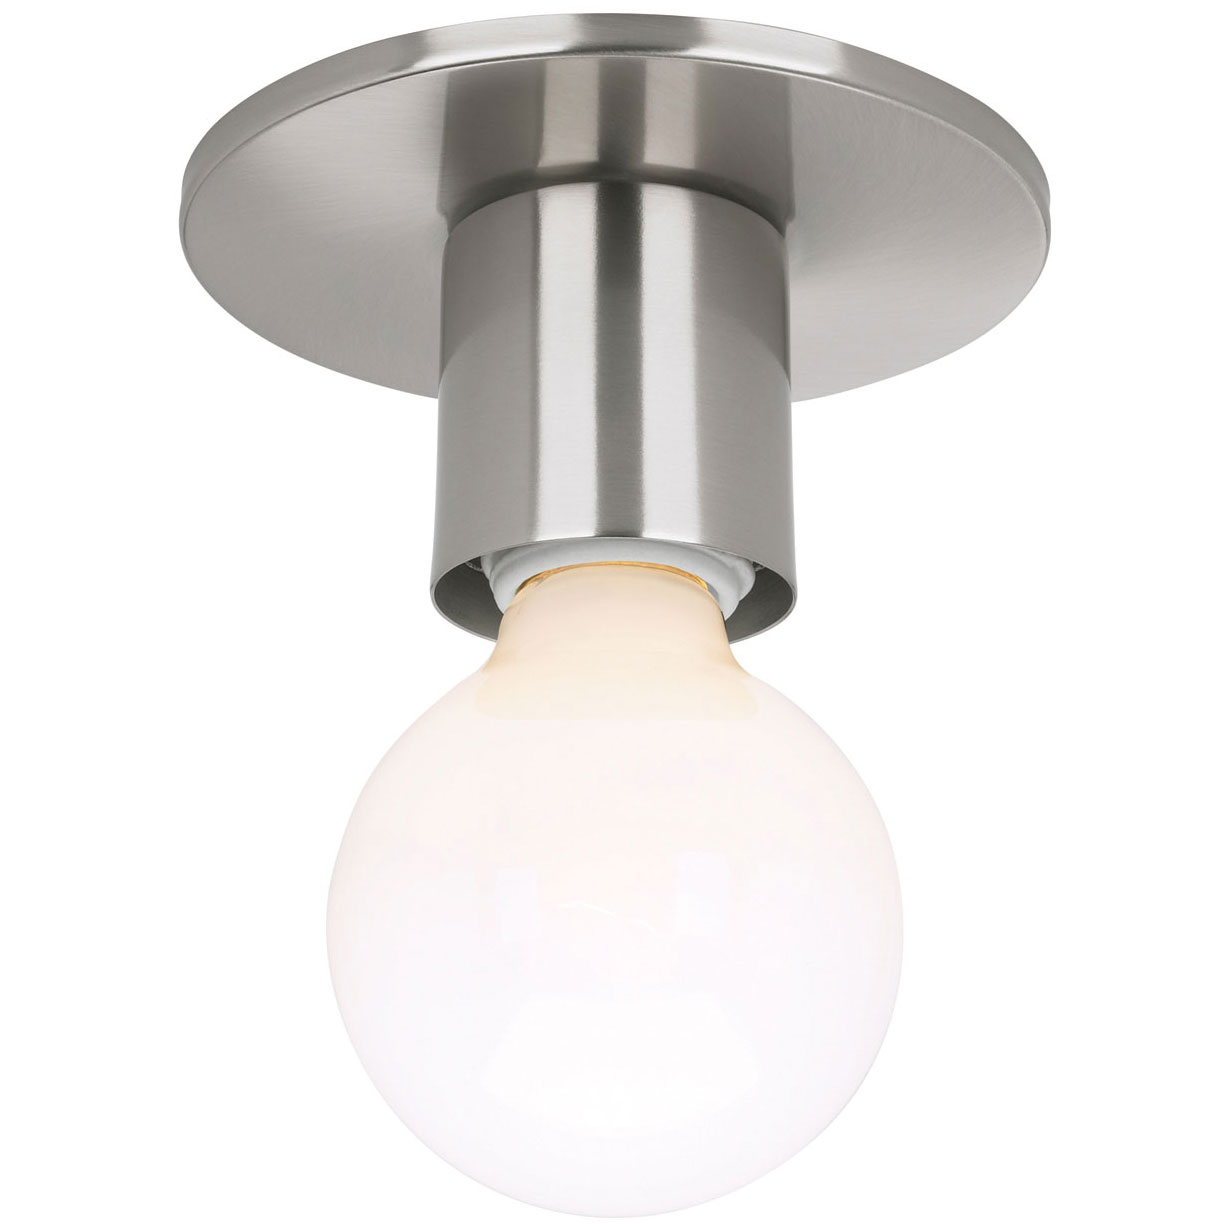 Style Socket Ceiling Light by Nuvo Lighting | 60-4801 | NVO987446